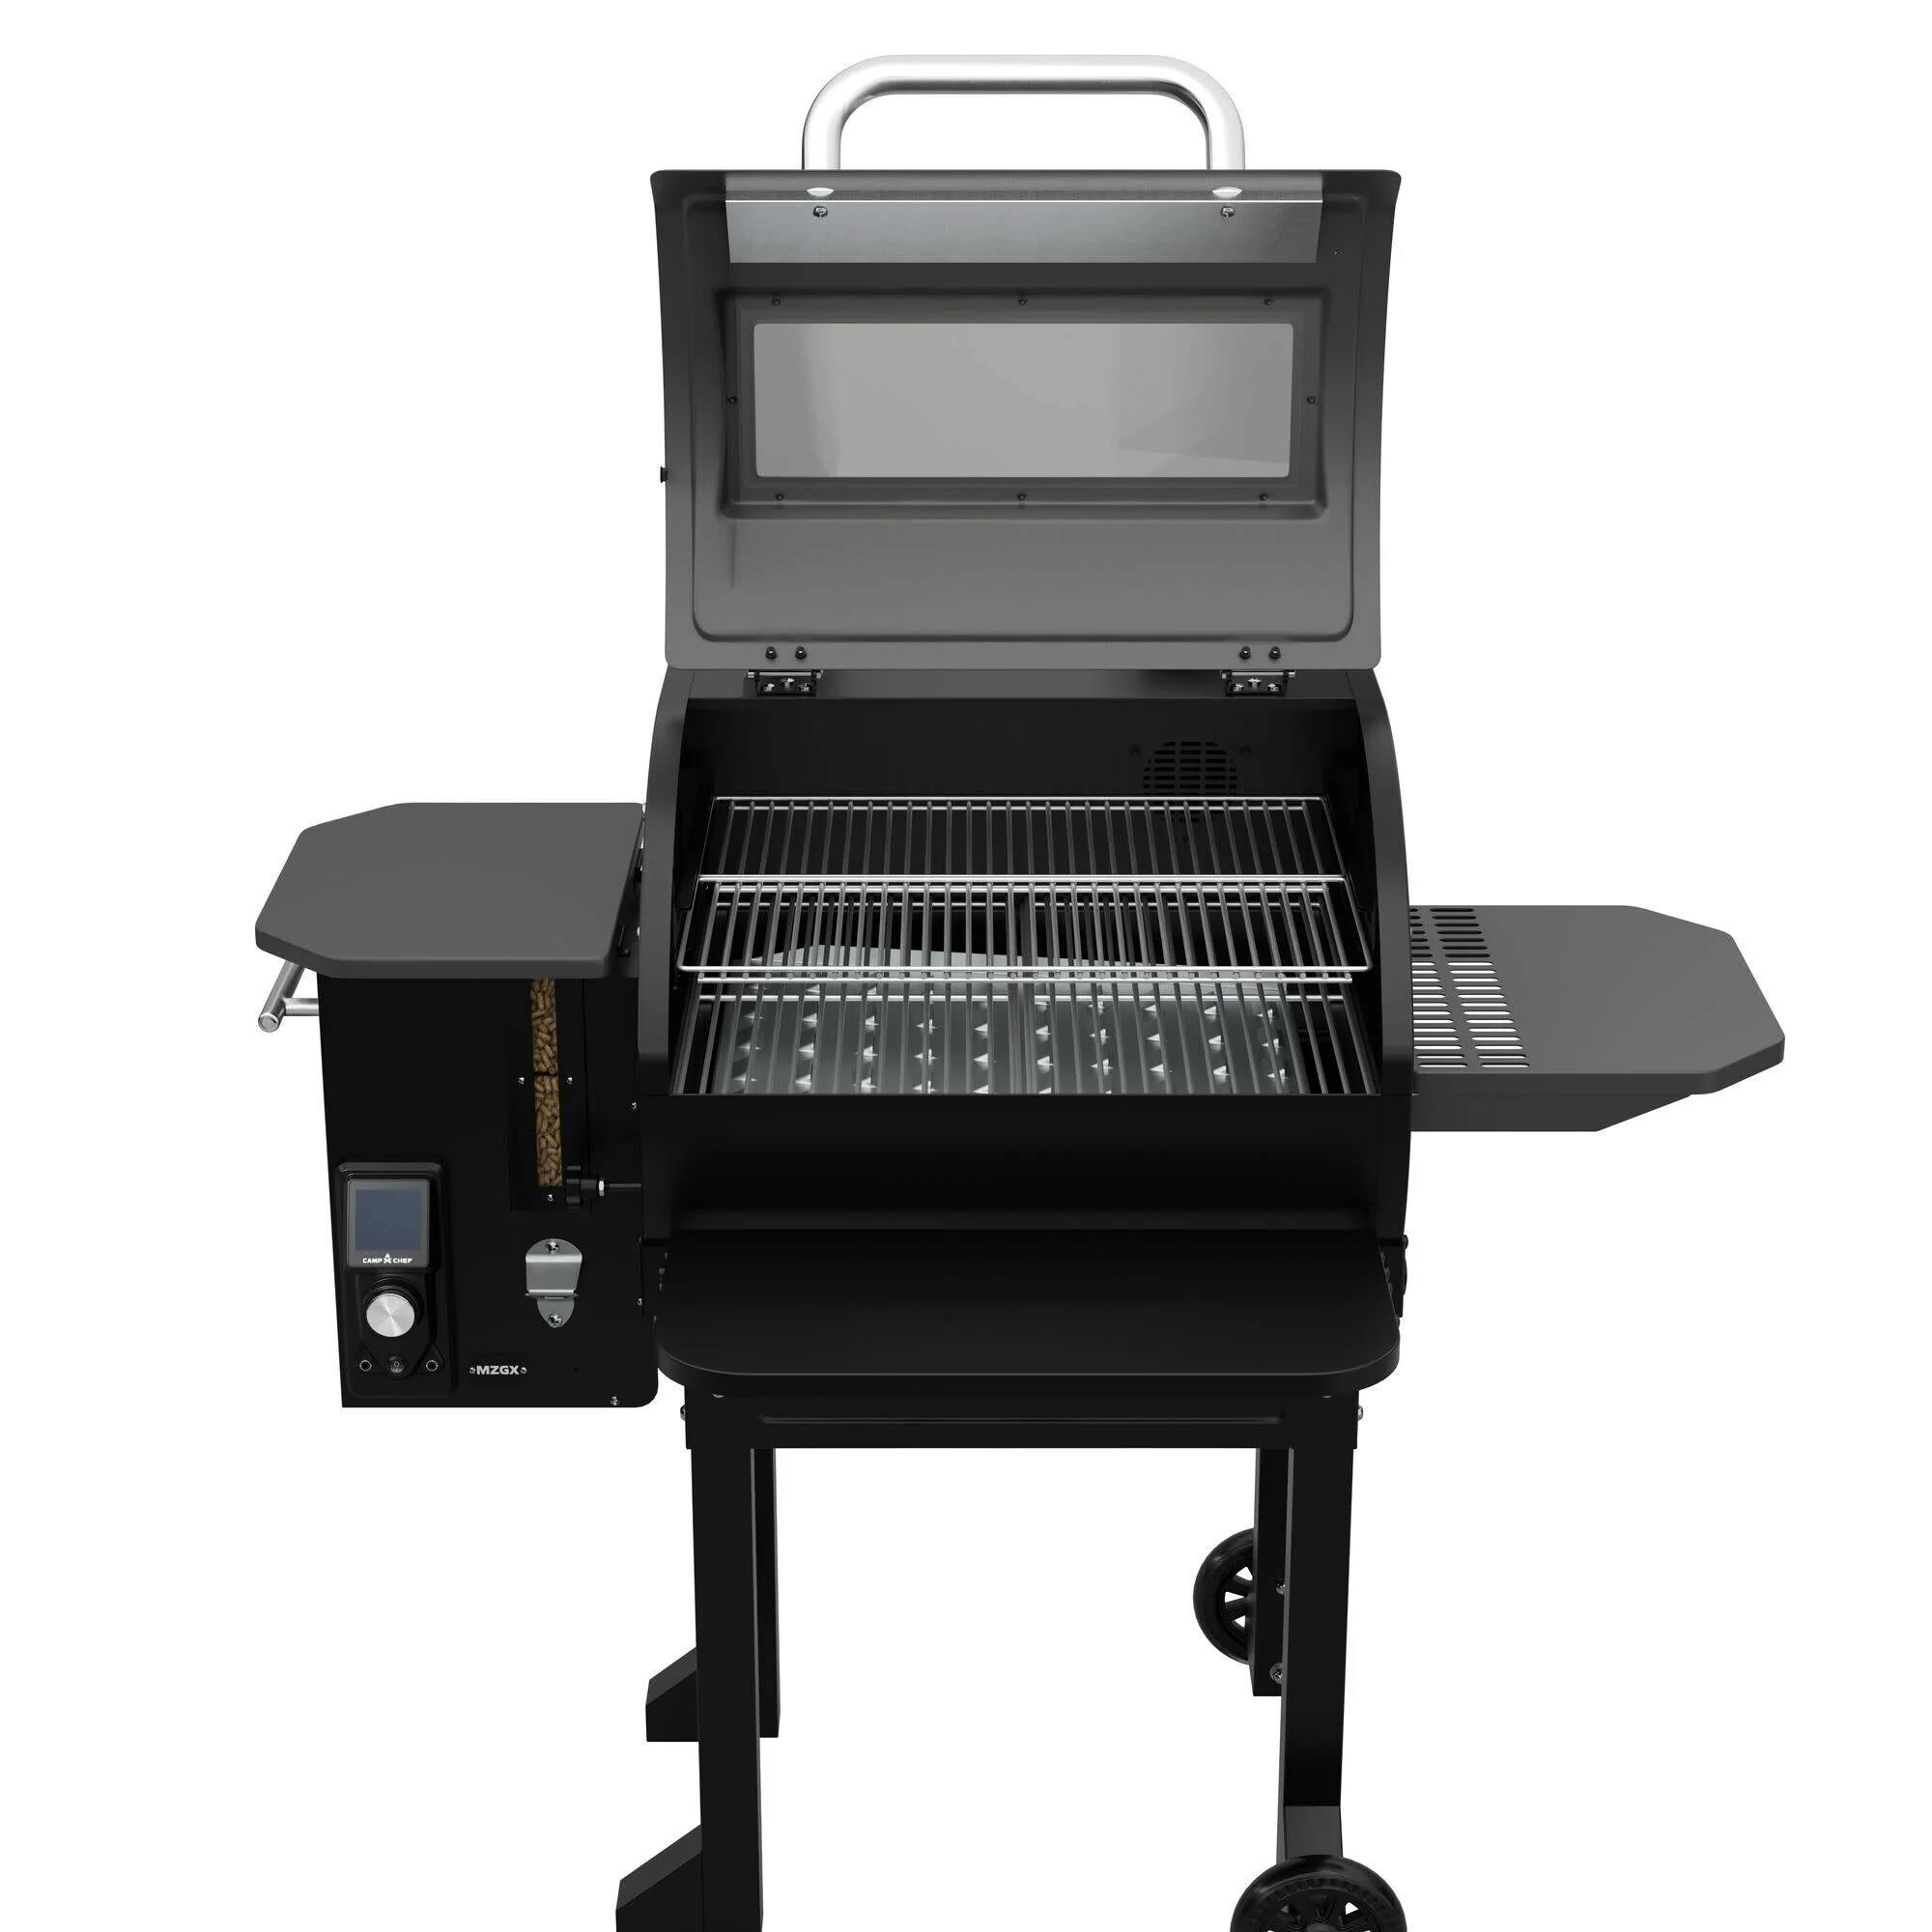 Camp Chef MZGX Pellet Grill